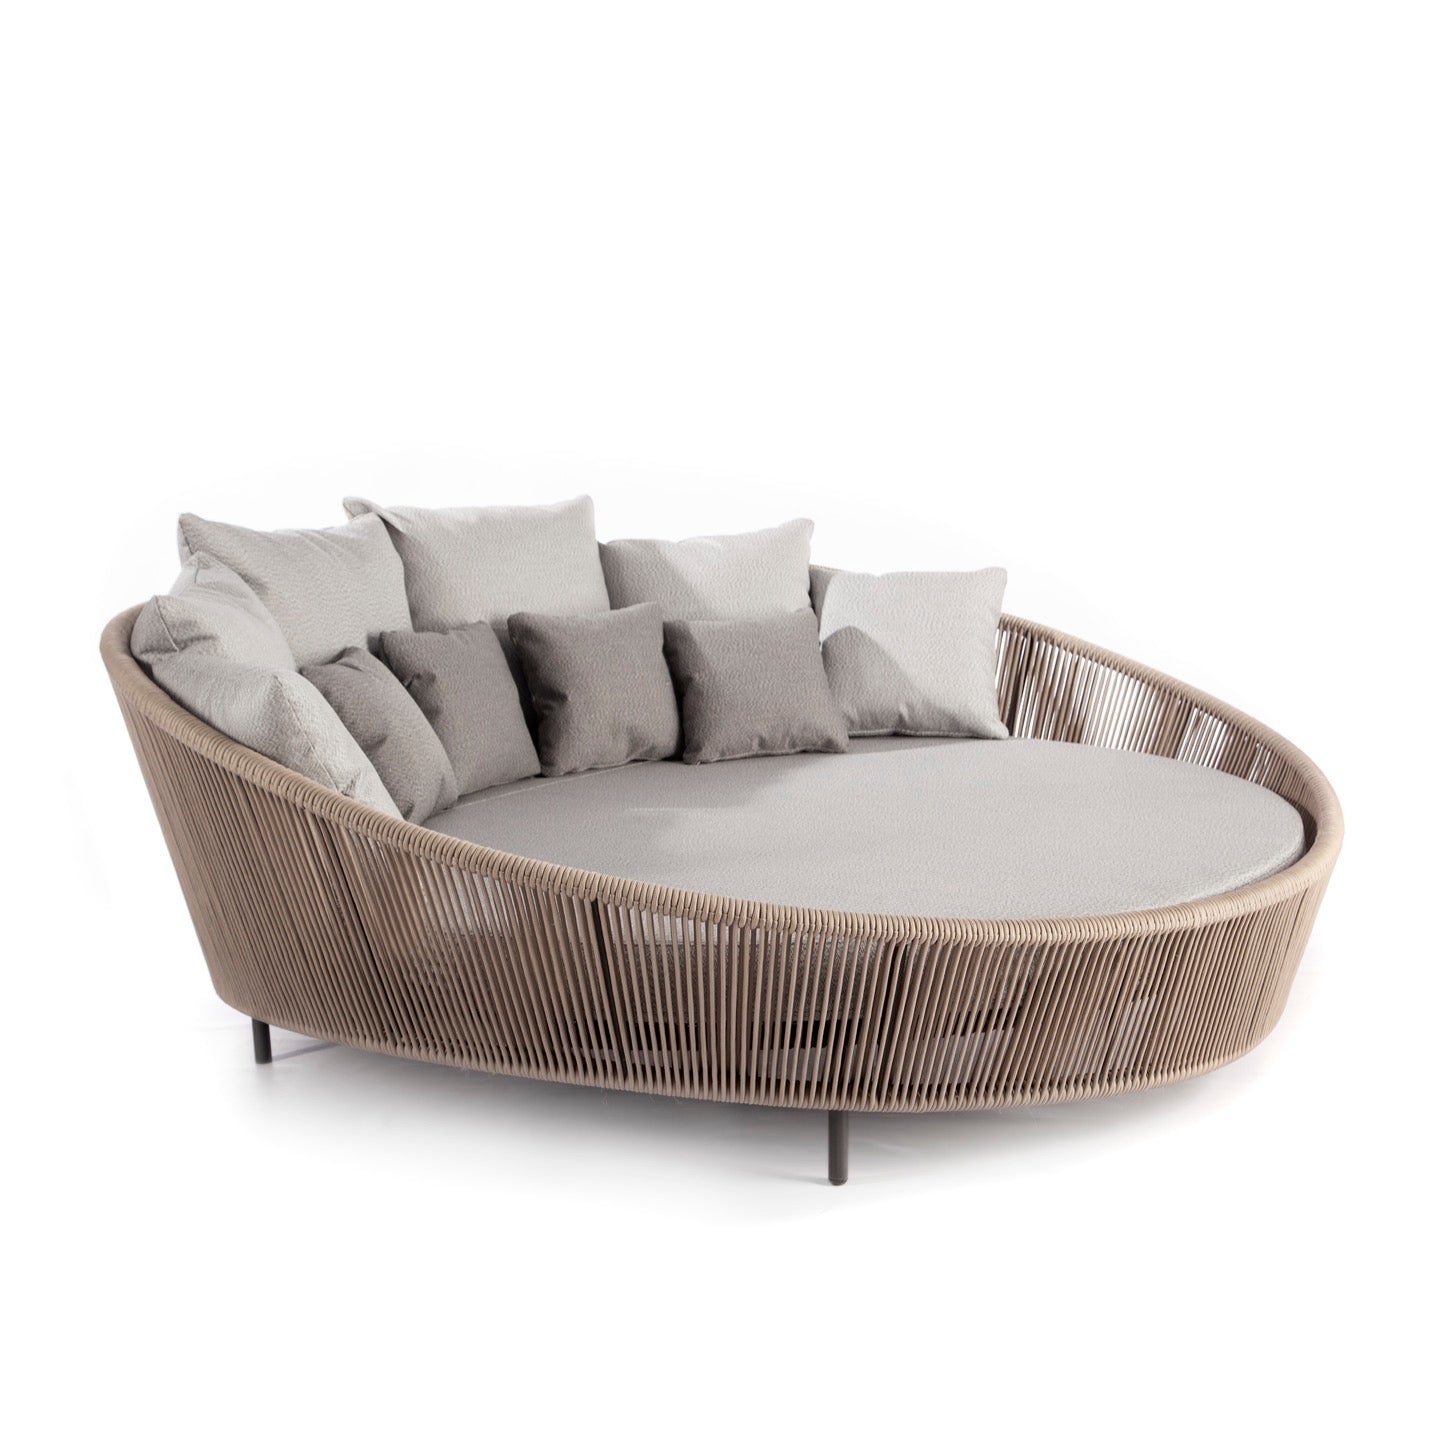 Rodona Round Daybed